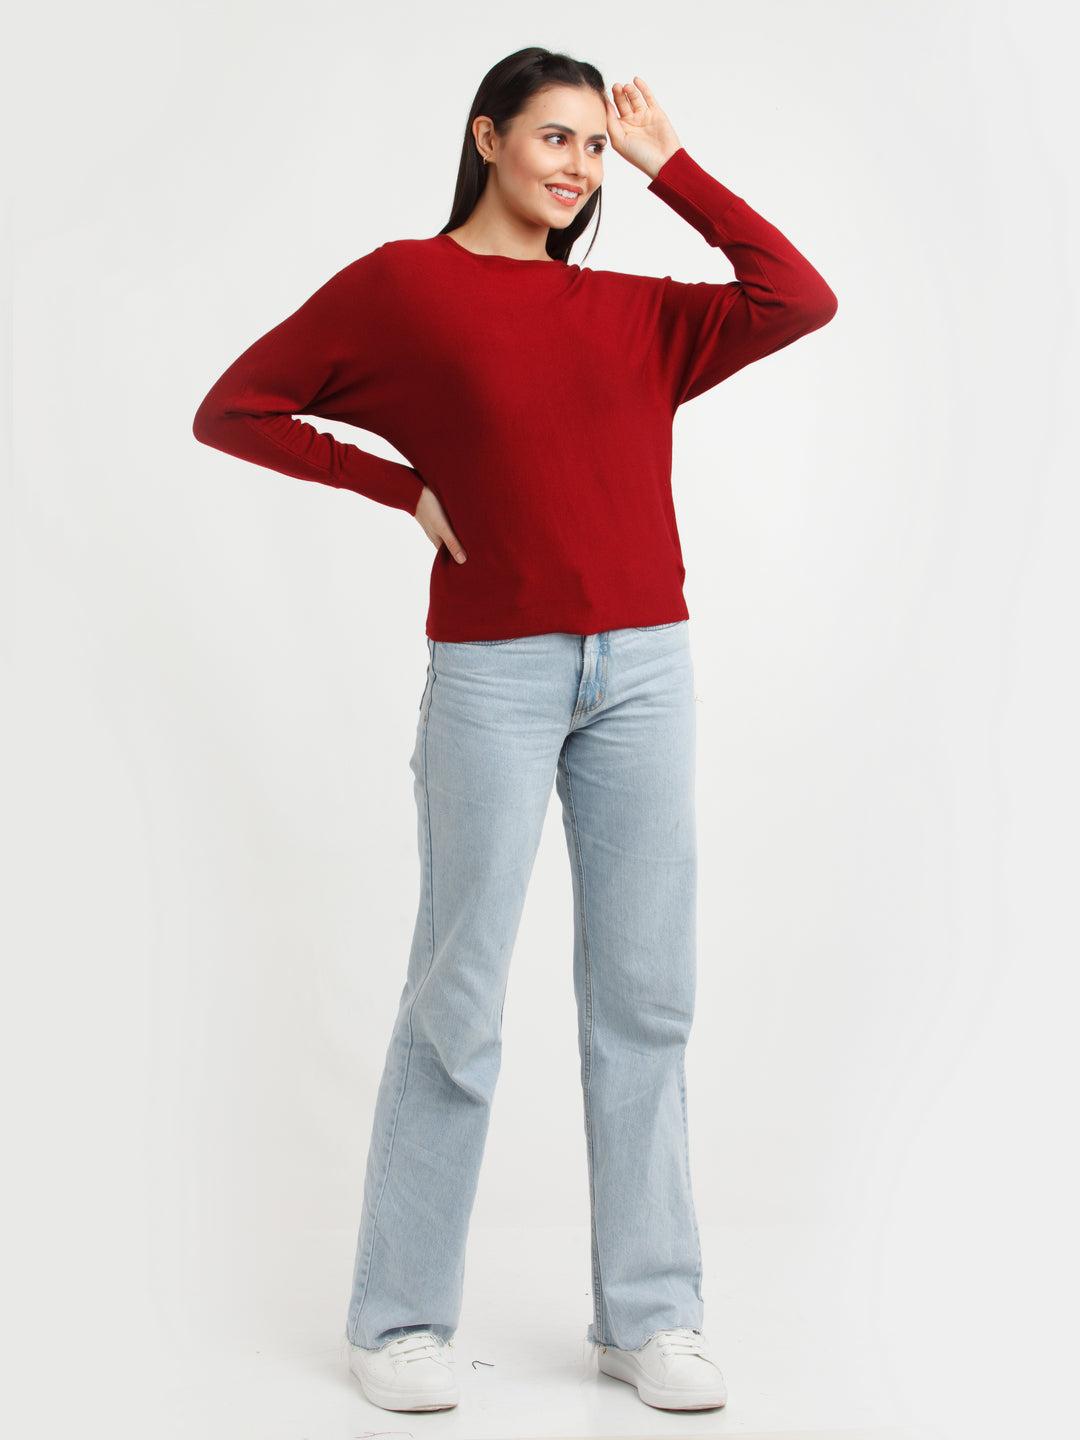 maroon-solid-sweater-for-women